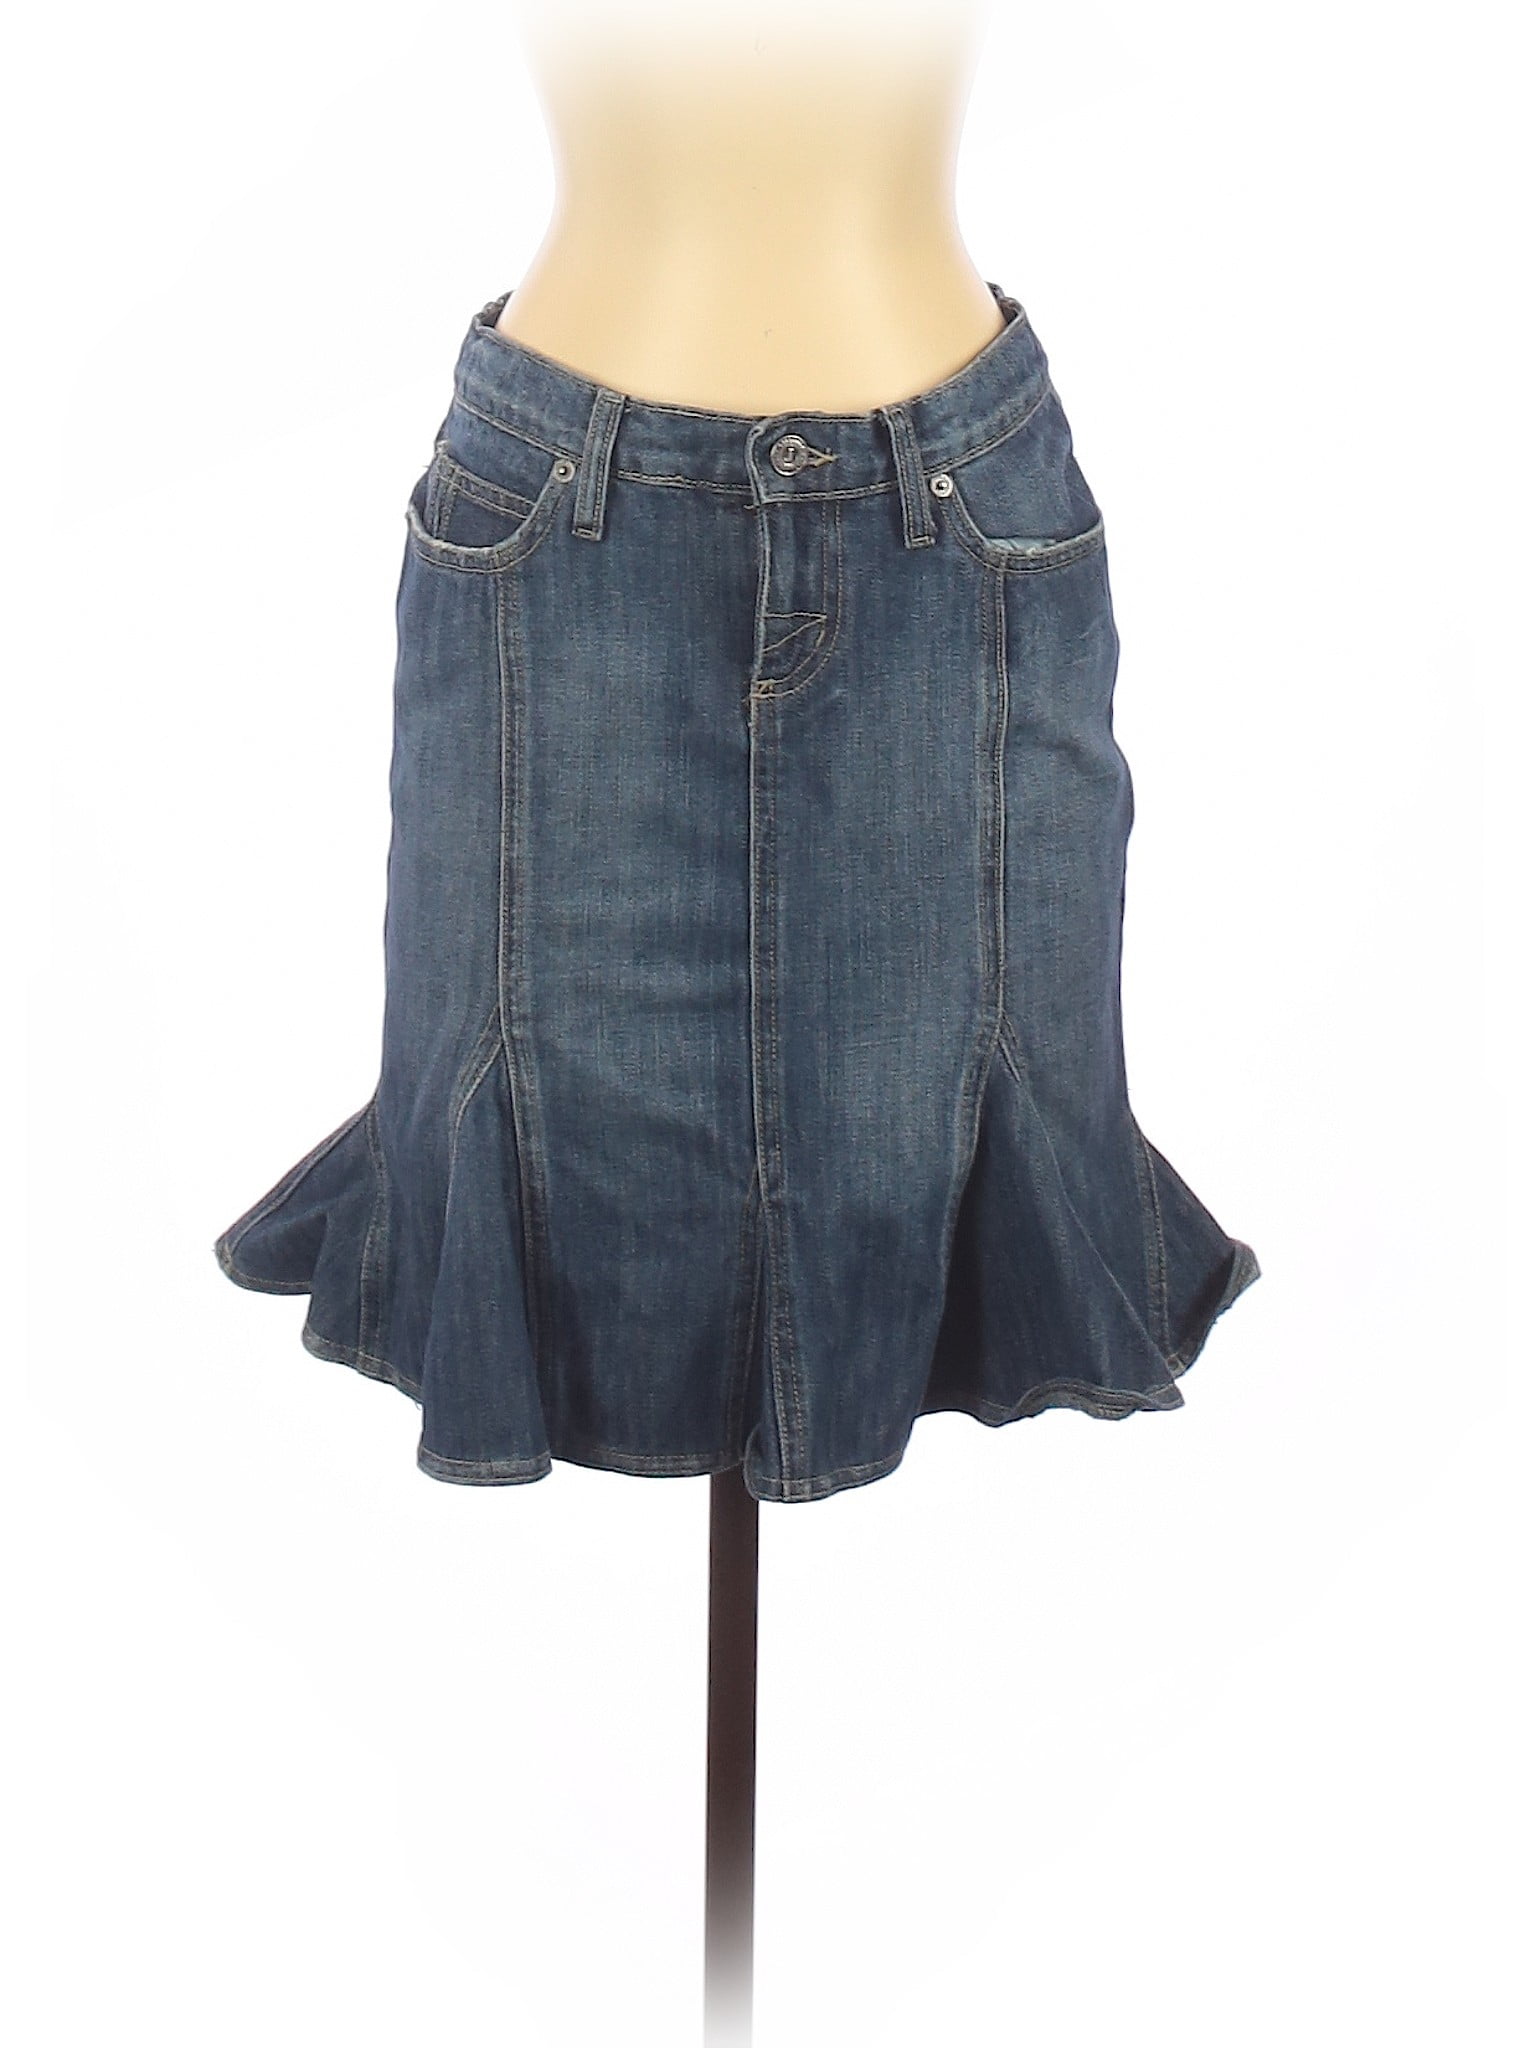 Juicy Couture - Pre-Owned Juicy Couture Women's Size P Denim Skirt ...